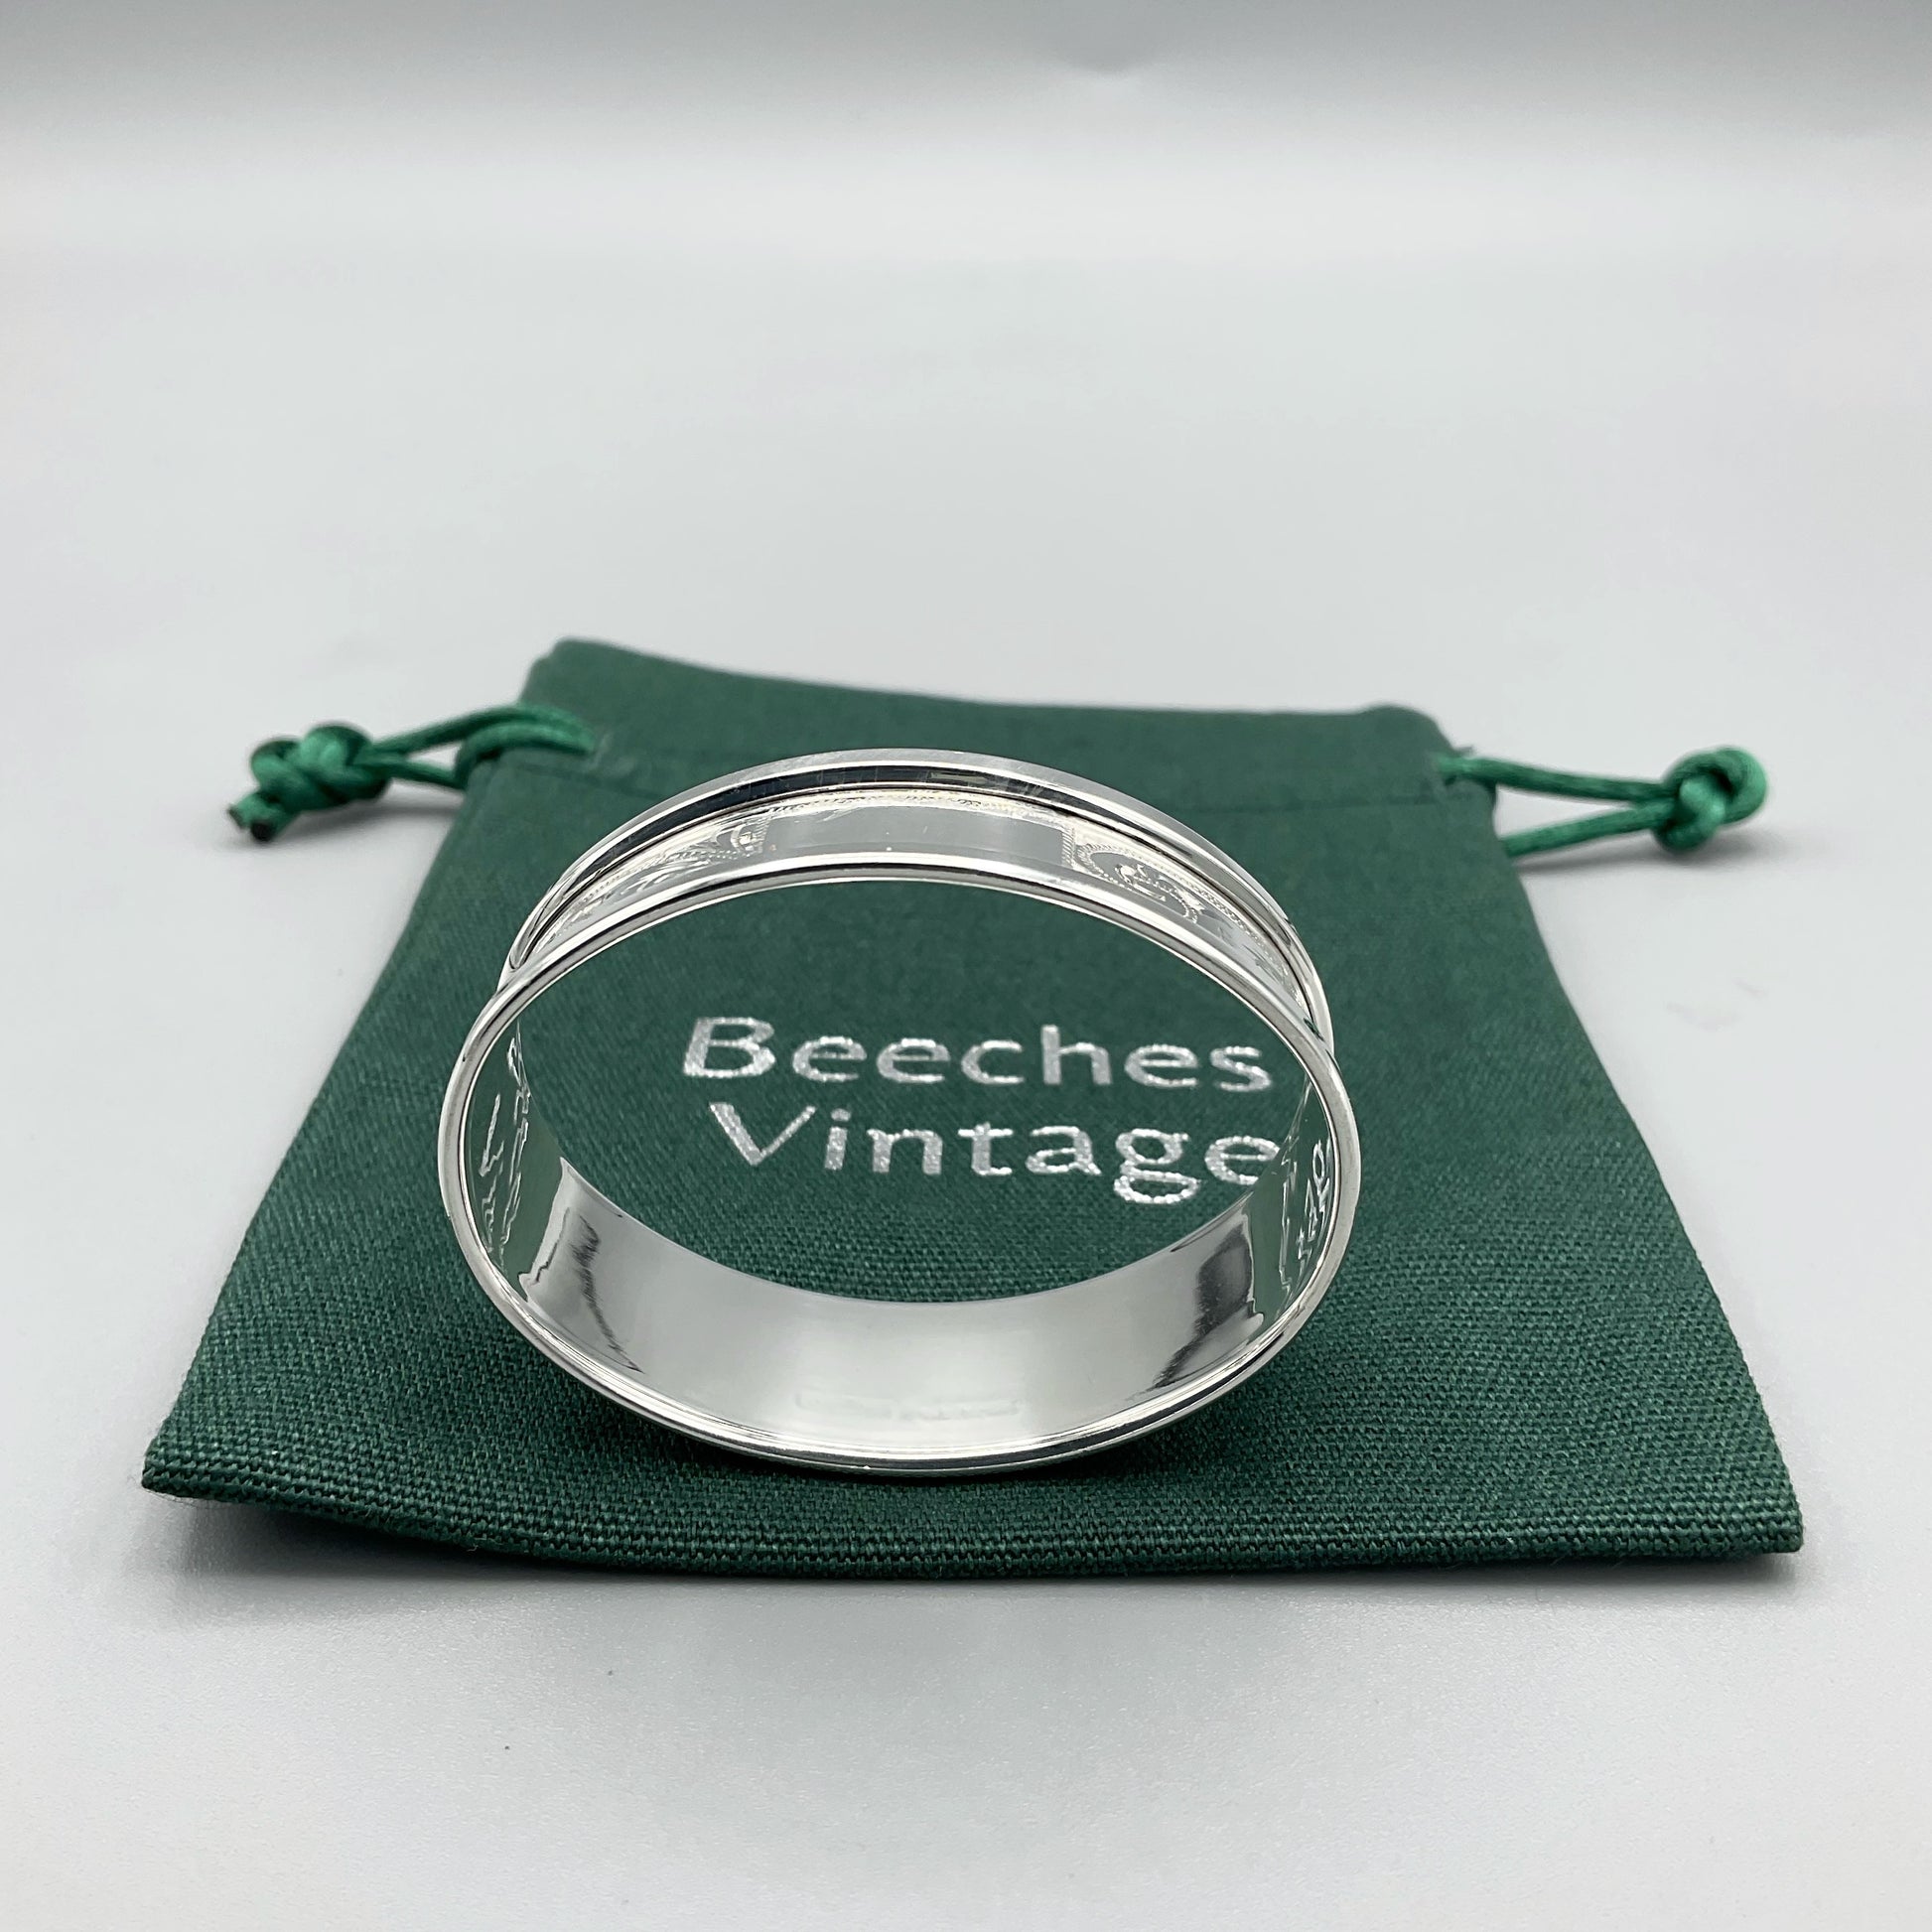 Engraved silver napkin ring sitting on a green cotton bag